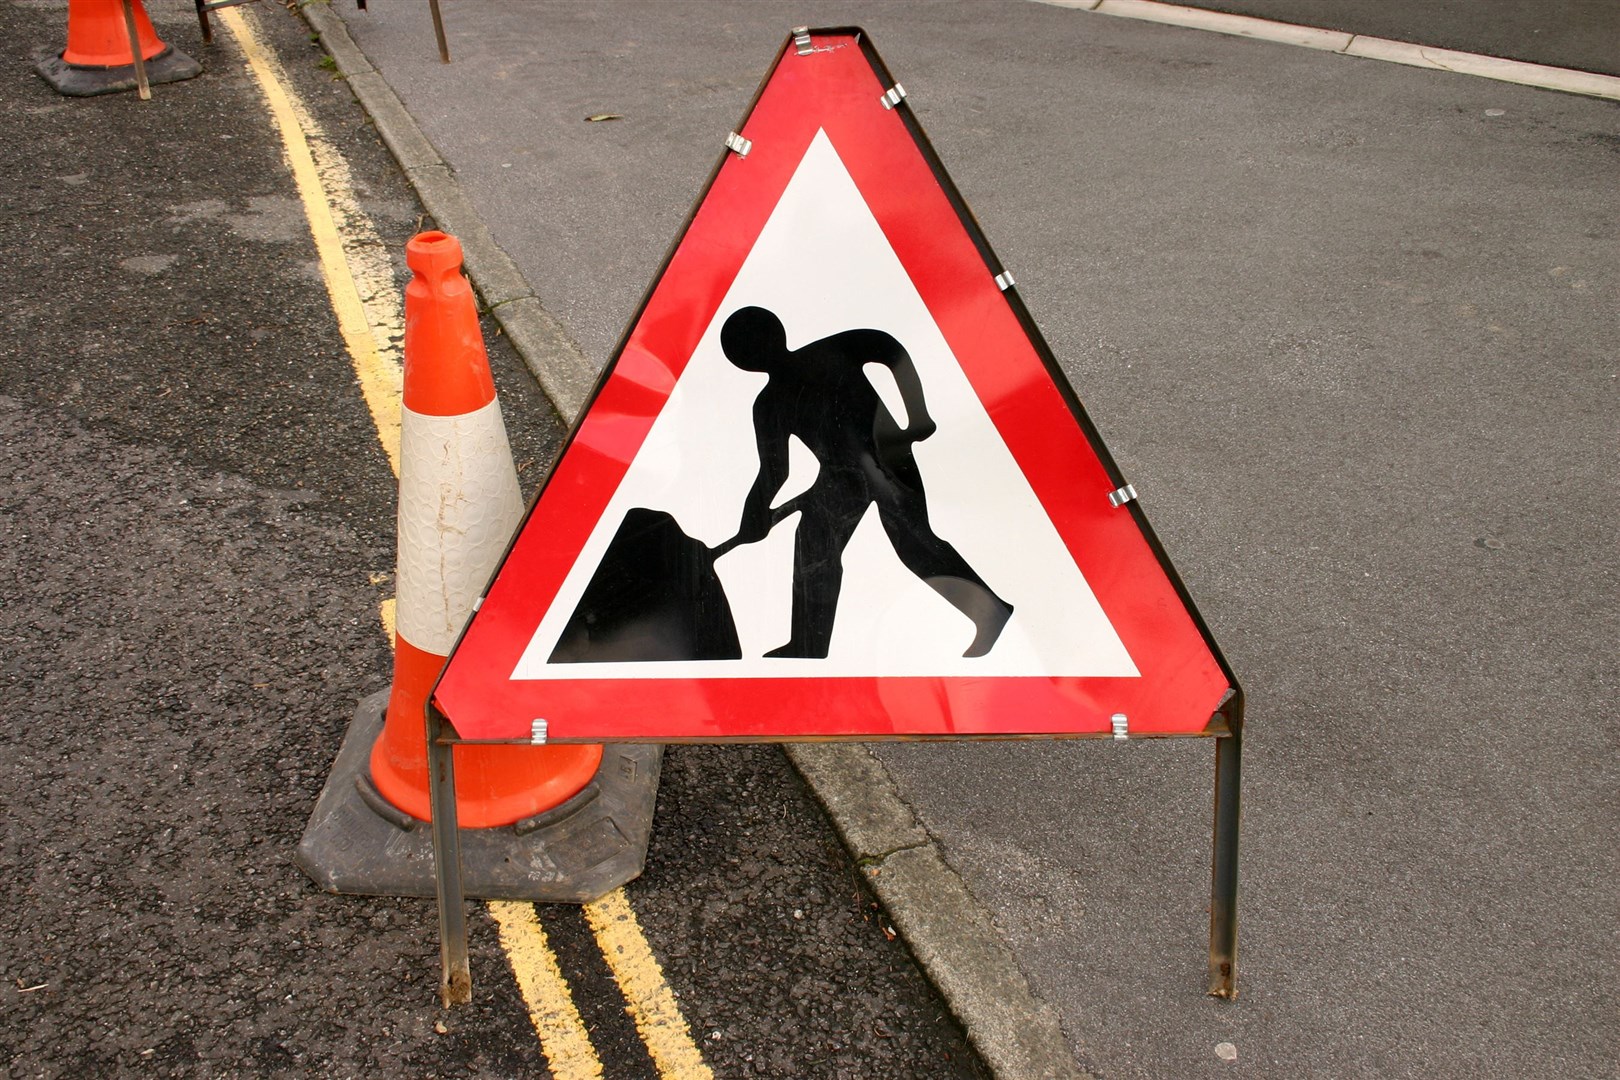 Motorists are being warned of a new planting crossing being added to the A9.